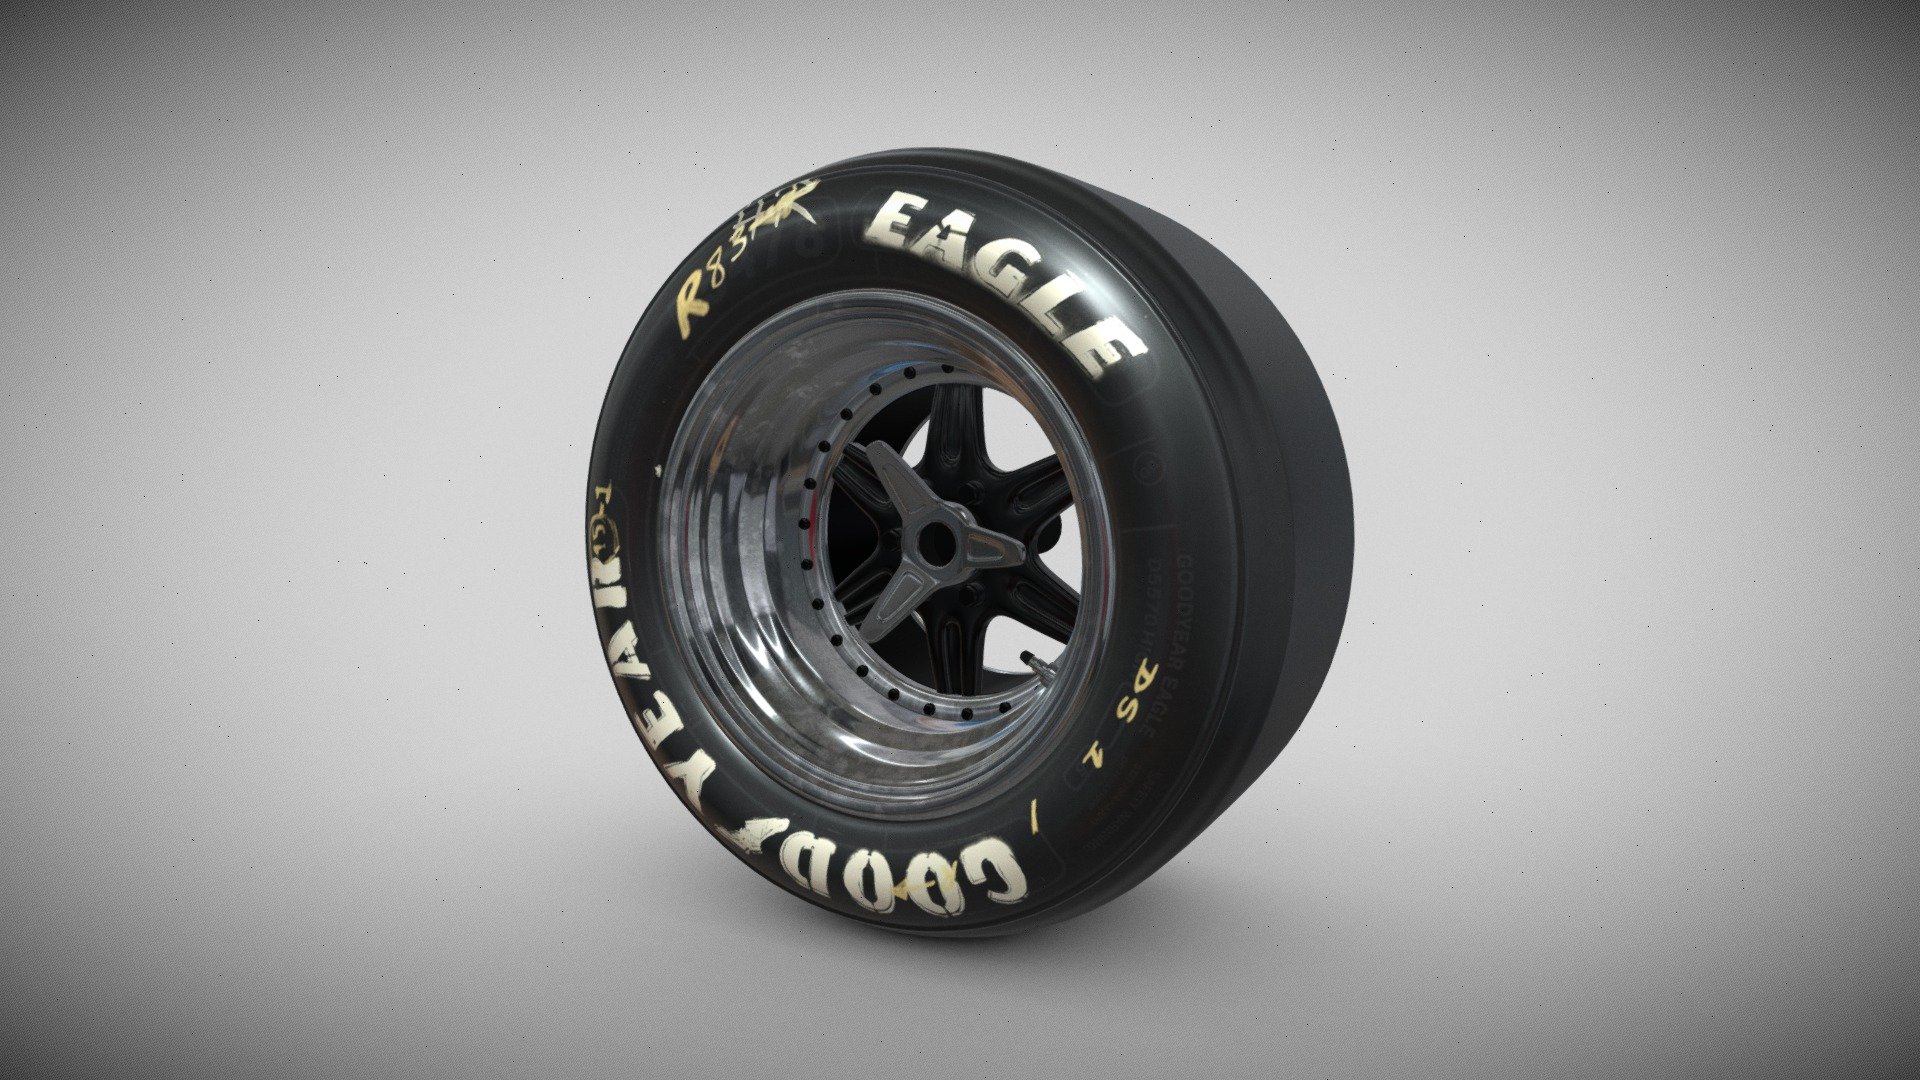 LOLA_MK3T70_ Racing Good Year Backwheels

Grand Prix Race Wheel as .fbx file
Made with Cinema 4D, testet in Marmoset Toolbag.
.FBX Backwheels - GoodYear
Front tire upon request 3d model